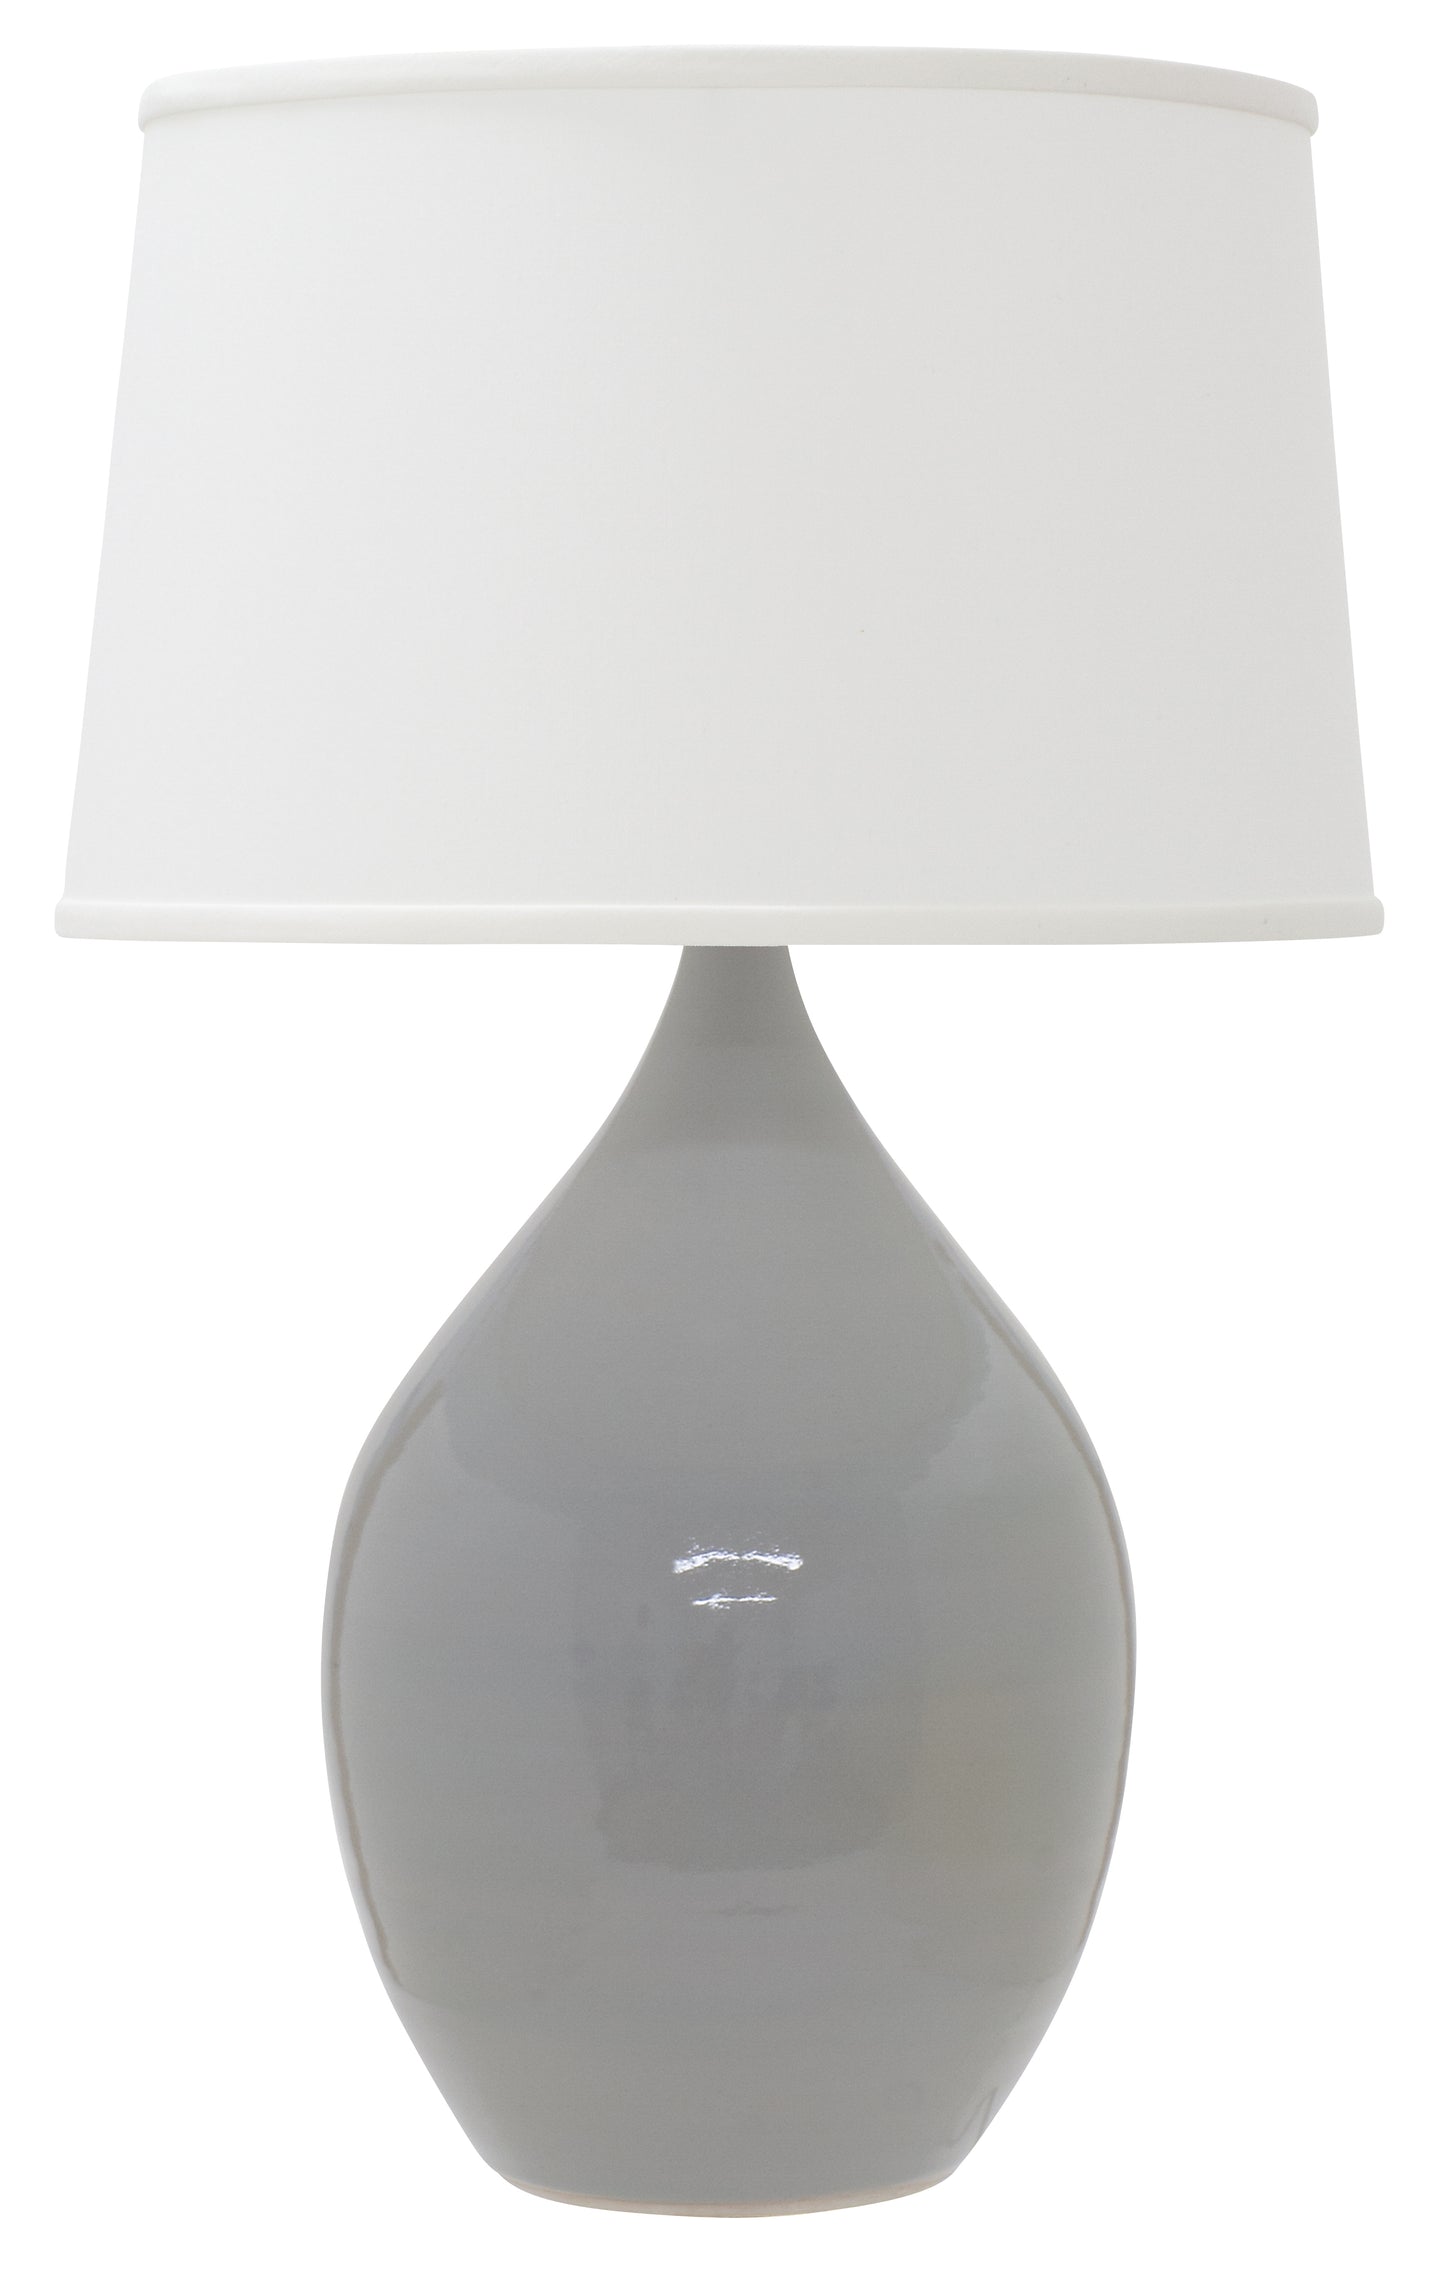 House of Troy Scatchard 24.5" Stoneware Table Lamp in Gray Gloss GS402-GG